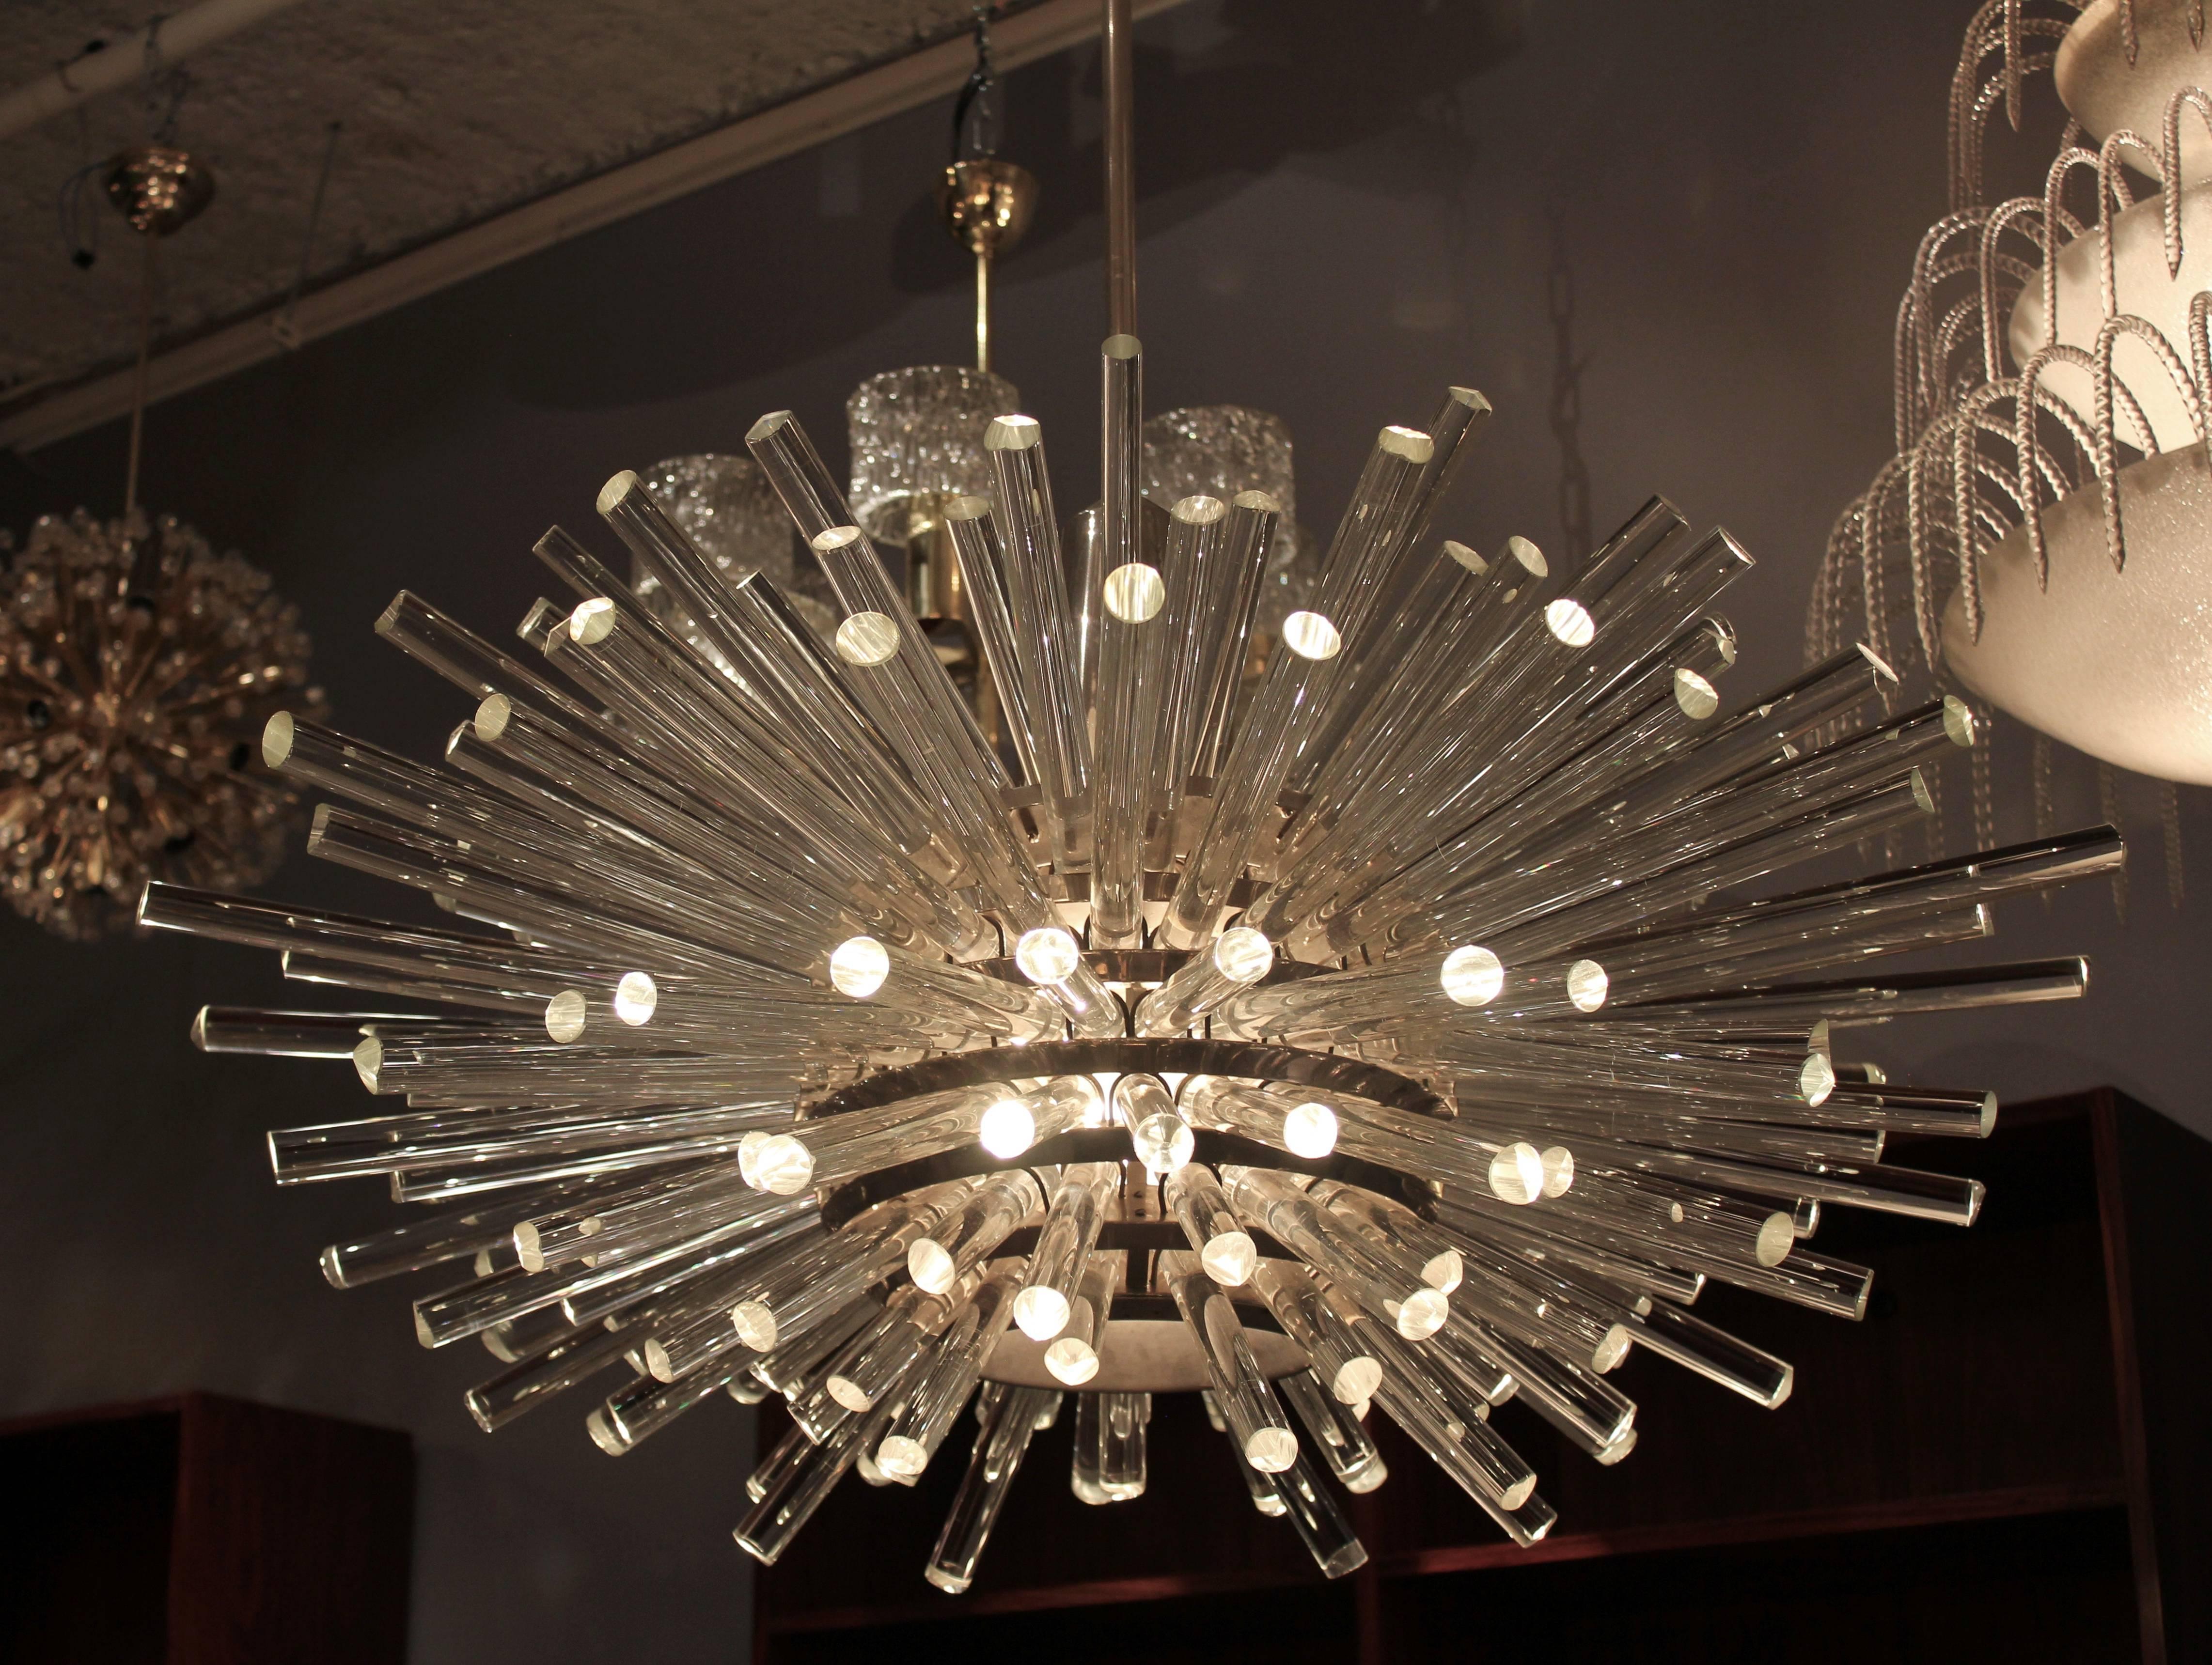 You are looking for the iconic miracle chandelier big model, original, never touched, nickel-plated from the 1960, only cleaned, with his original long hanging bar (an original extension not on the photos is also available). With all the originals